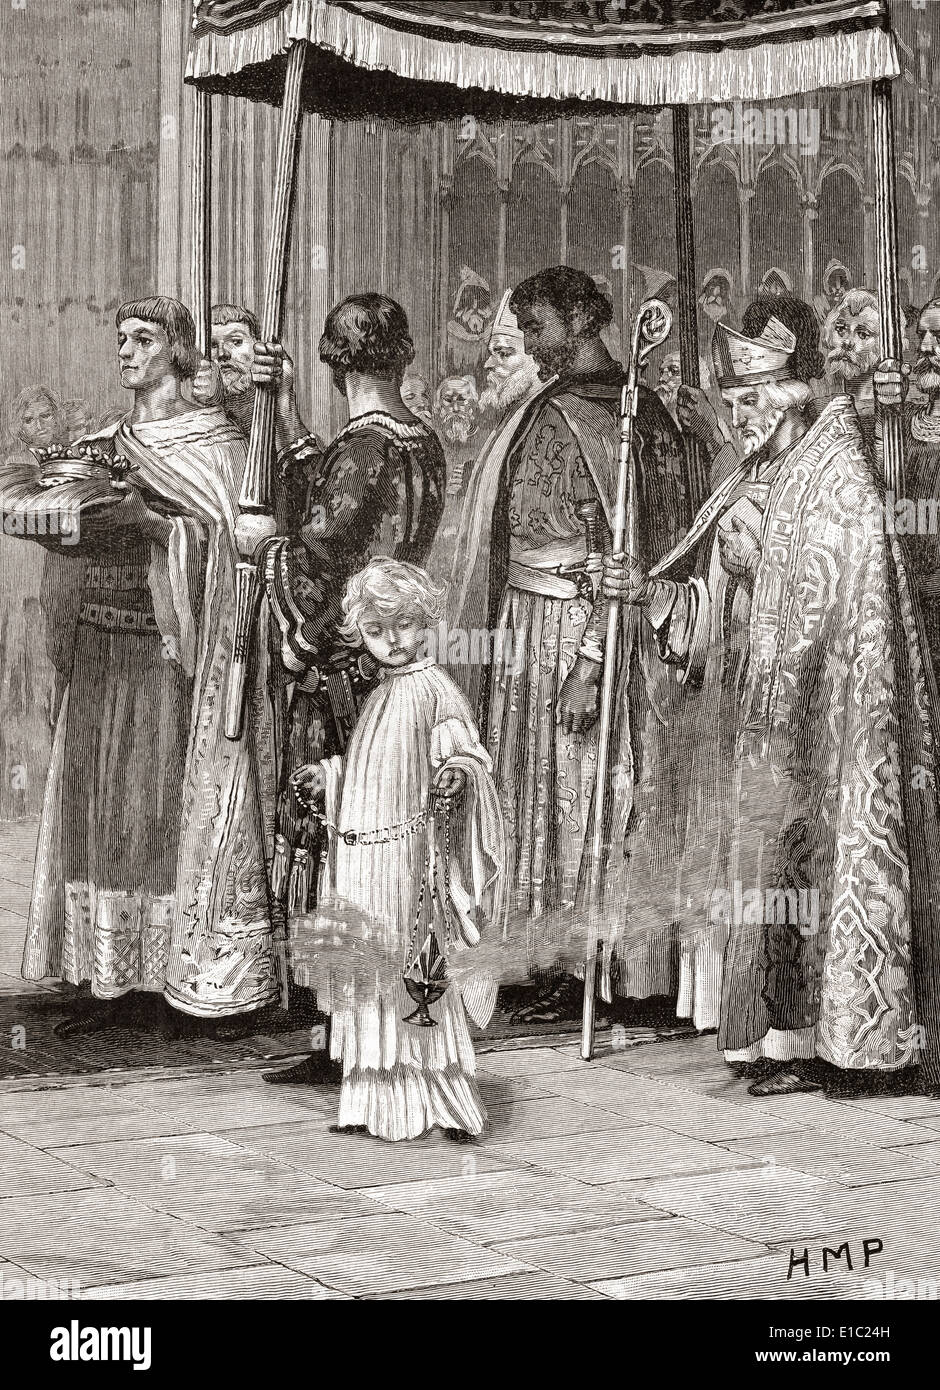 Coronation of King Richard I in 1189 in Westminster Abbey, London, England. Stock Photo